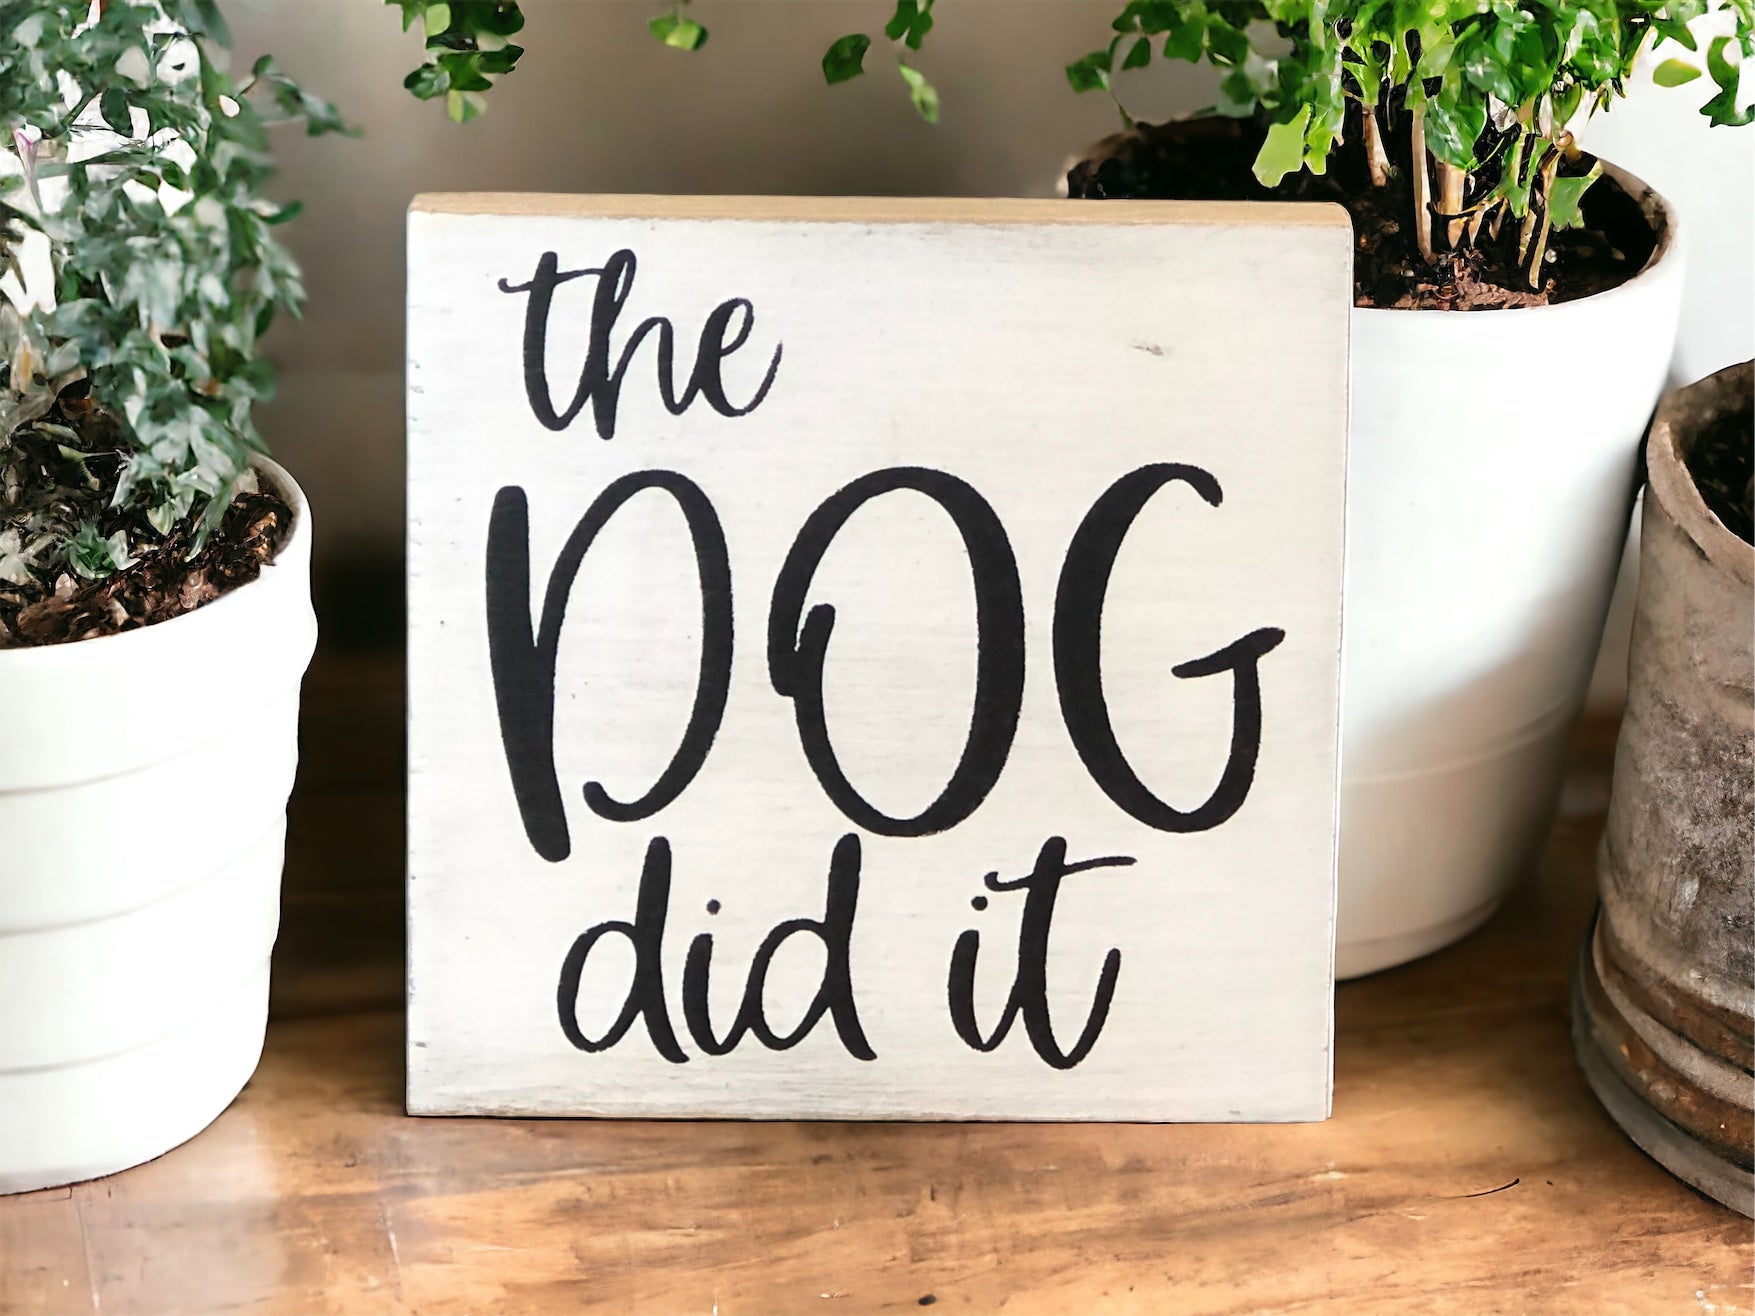 "The dog did it" wood sign